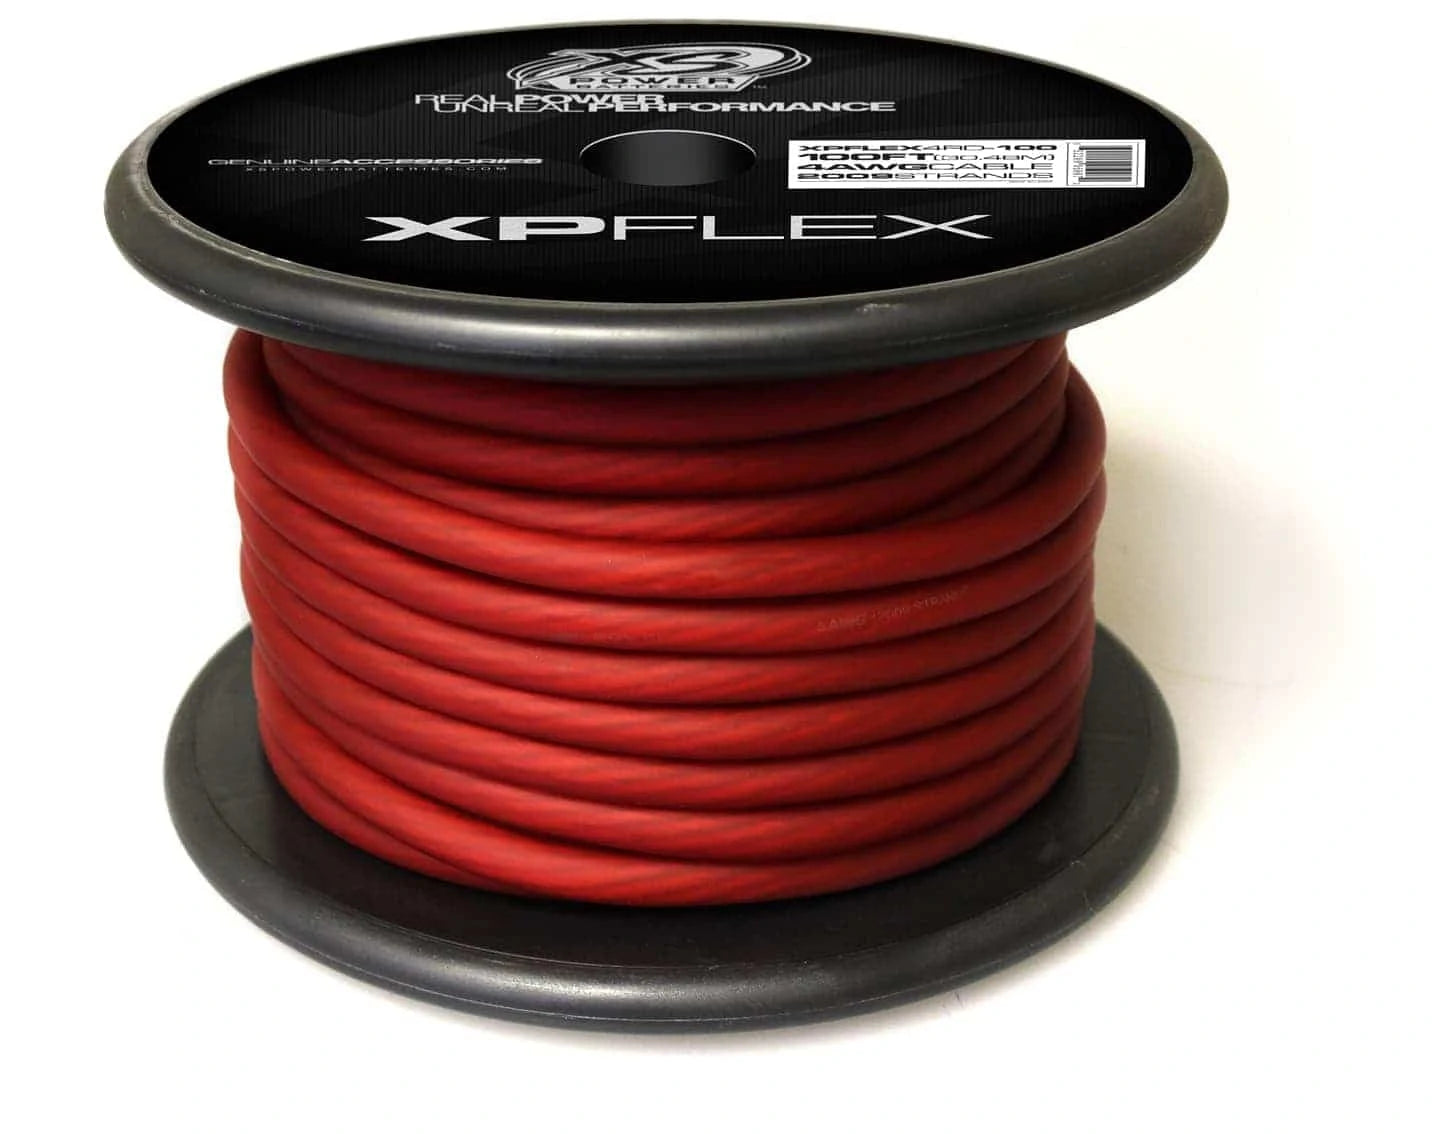 XS Power 4 AWG Gauge XP Flex Car Audio Power and Ground Cable 100ft Spool Electrical Wire